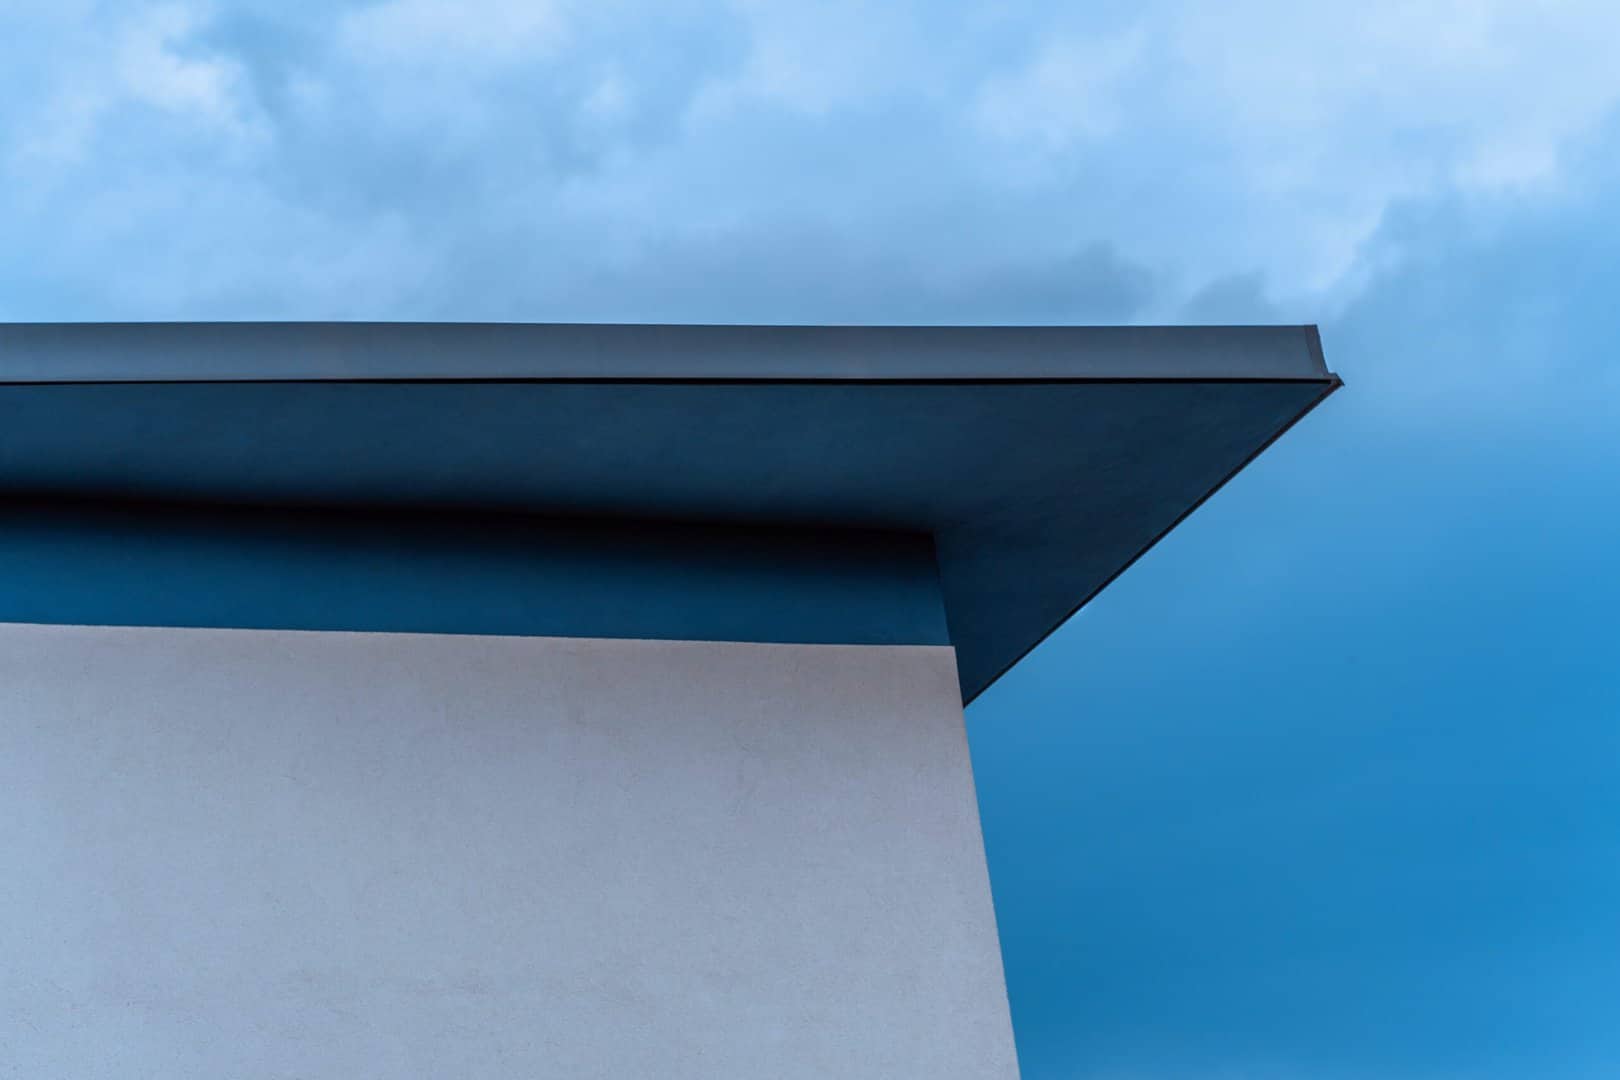 A flat roof with a partly cloudy sky behind it.